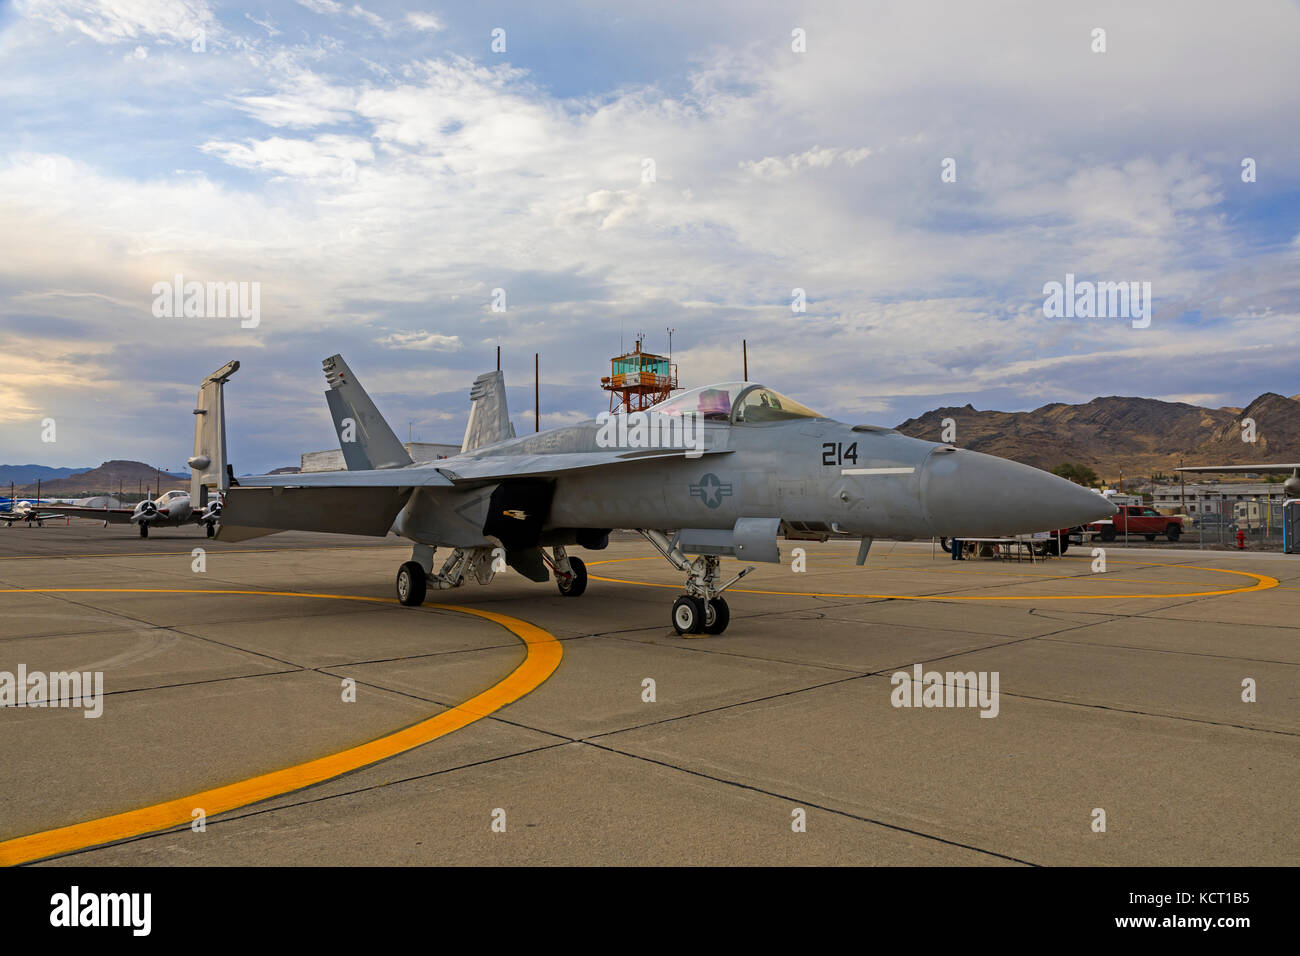 In this shot a U.S. Navy E/F-18E Super Hornet sits on the tarmac at the Historic Wendover Airfield in Wendover, Utah, USA. Stock Photo